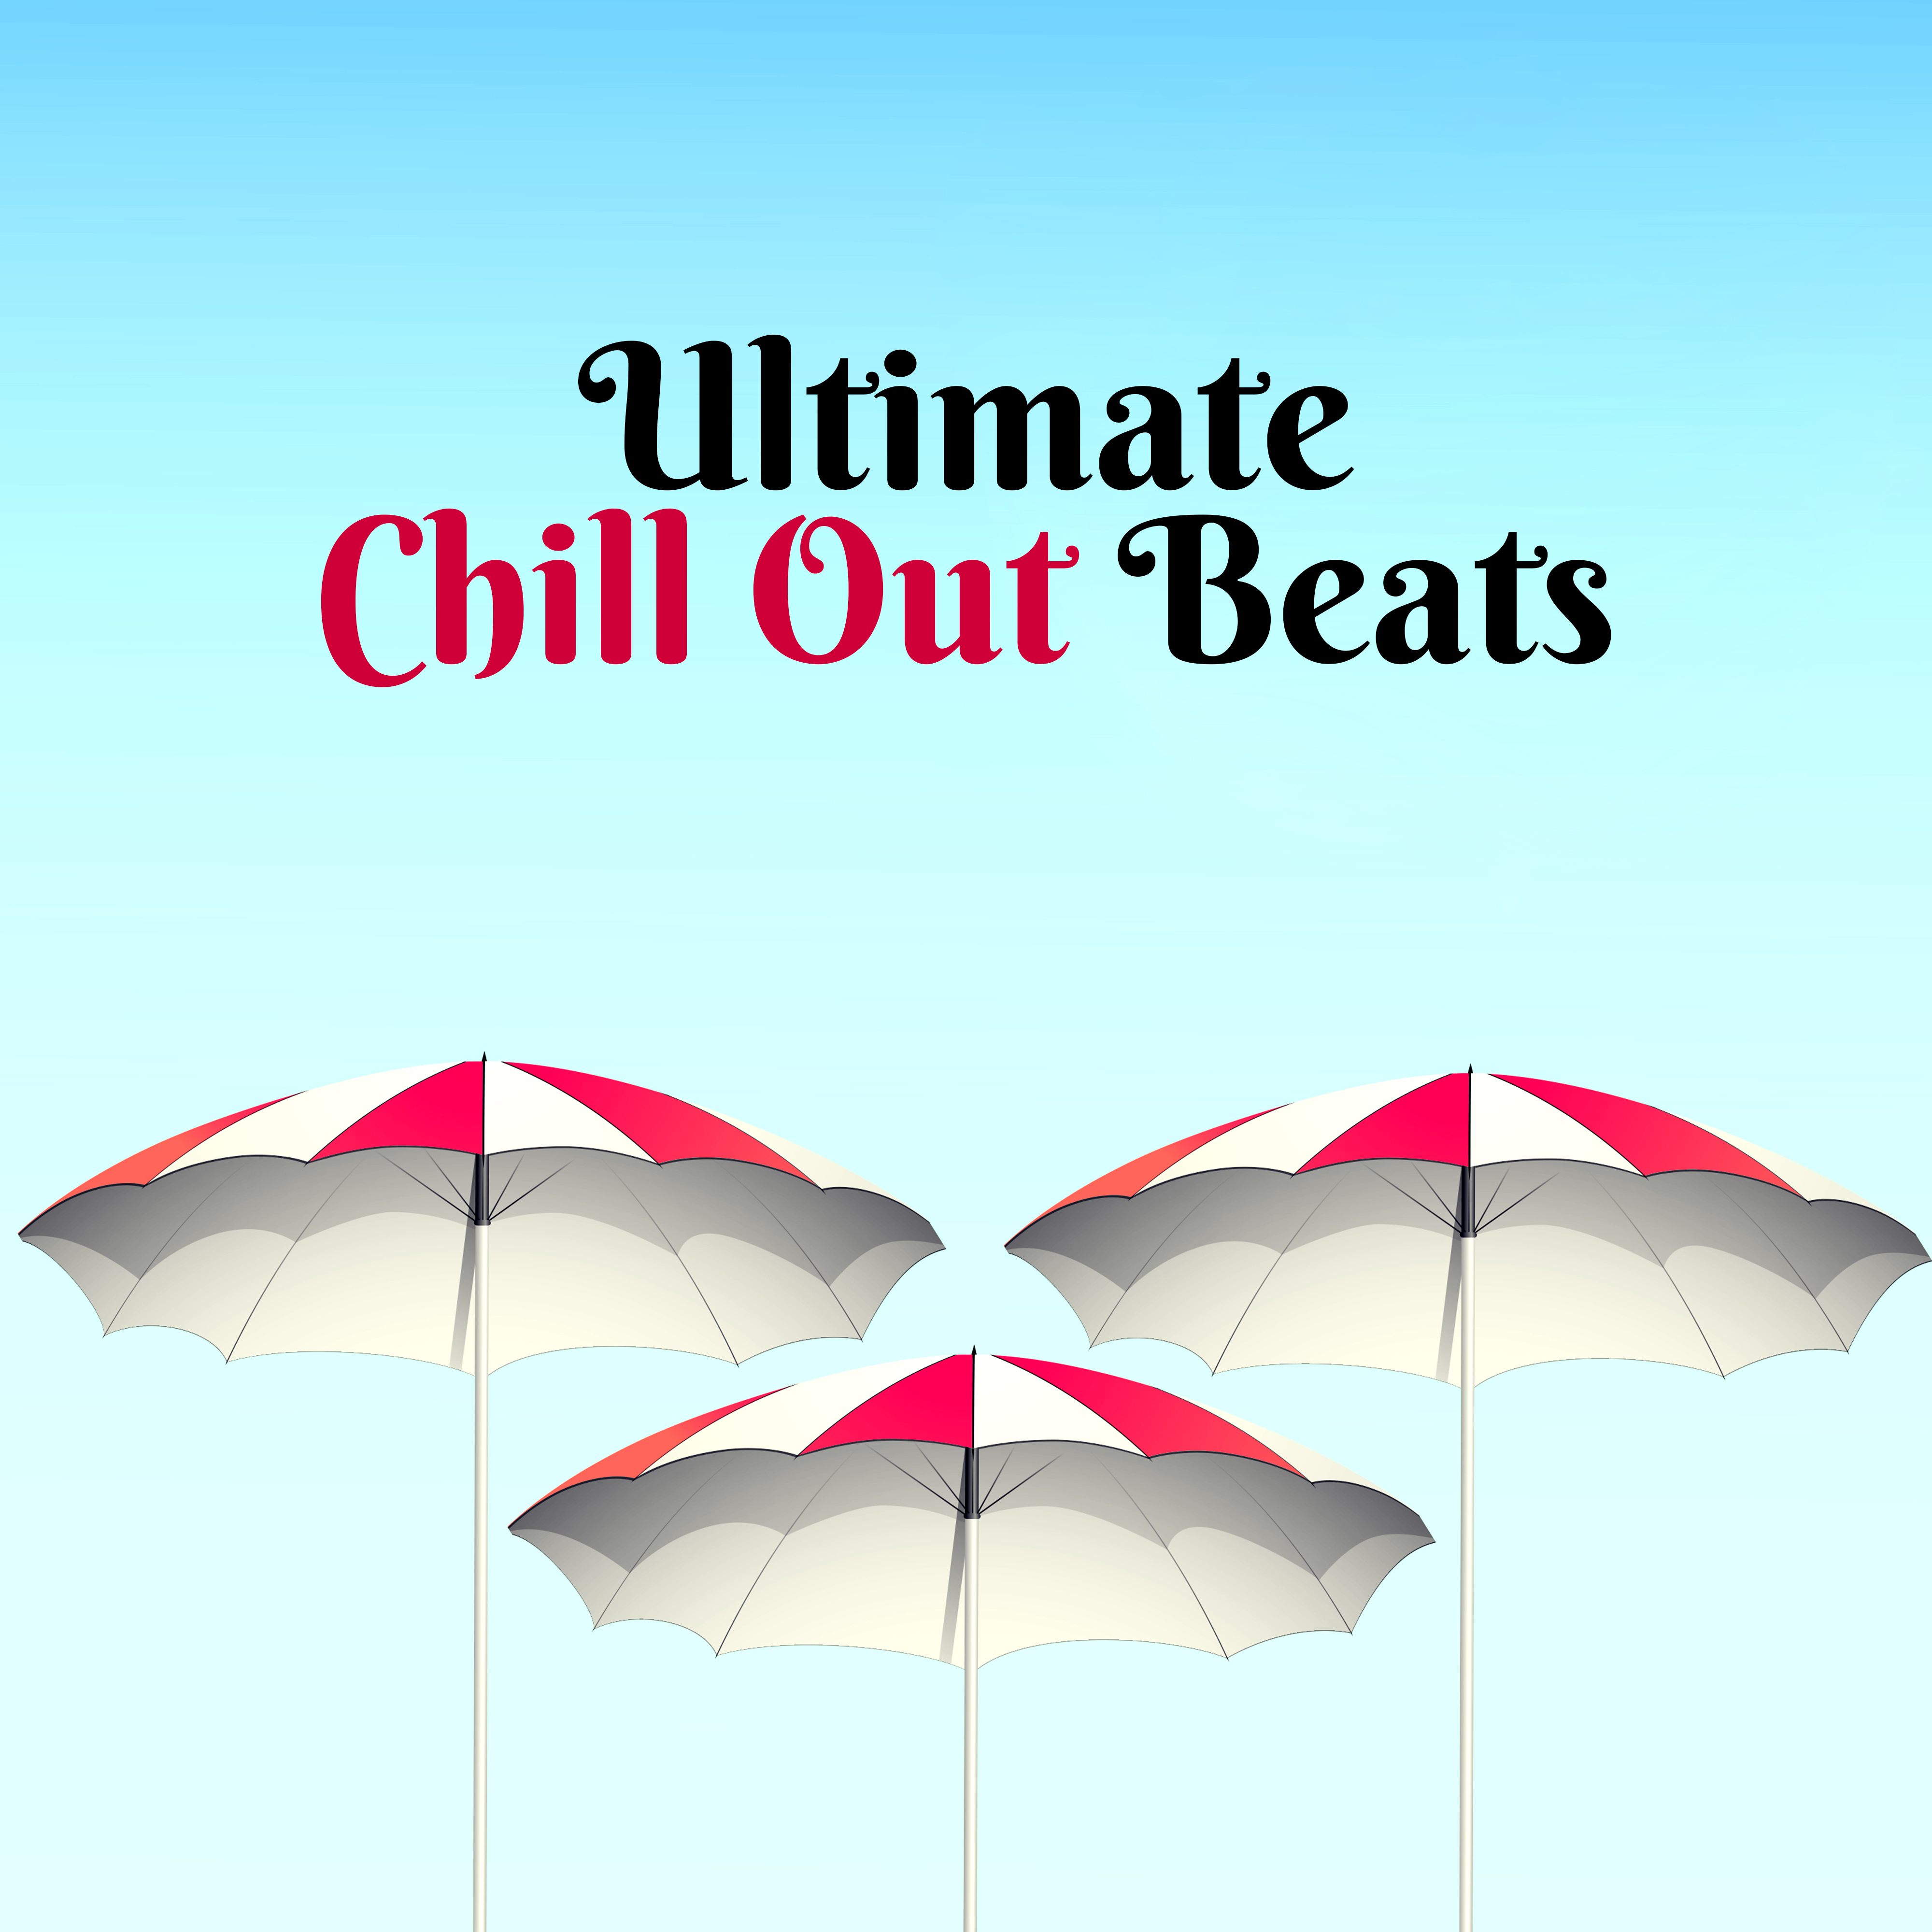 Ultimate Chill Out Beats  Selected Chill Out Music, The Best of Summer Music, Relax, Party, Dance